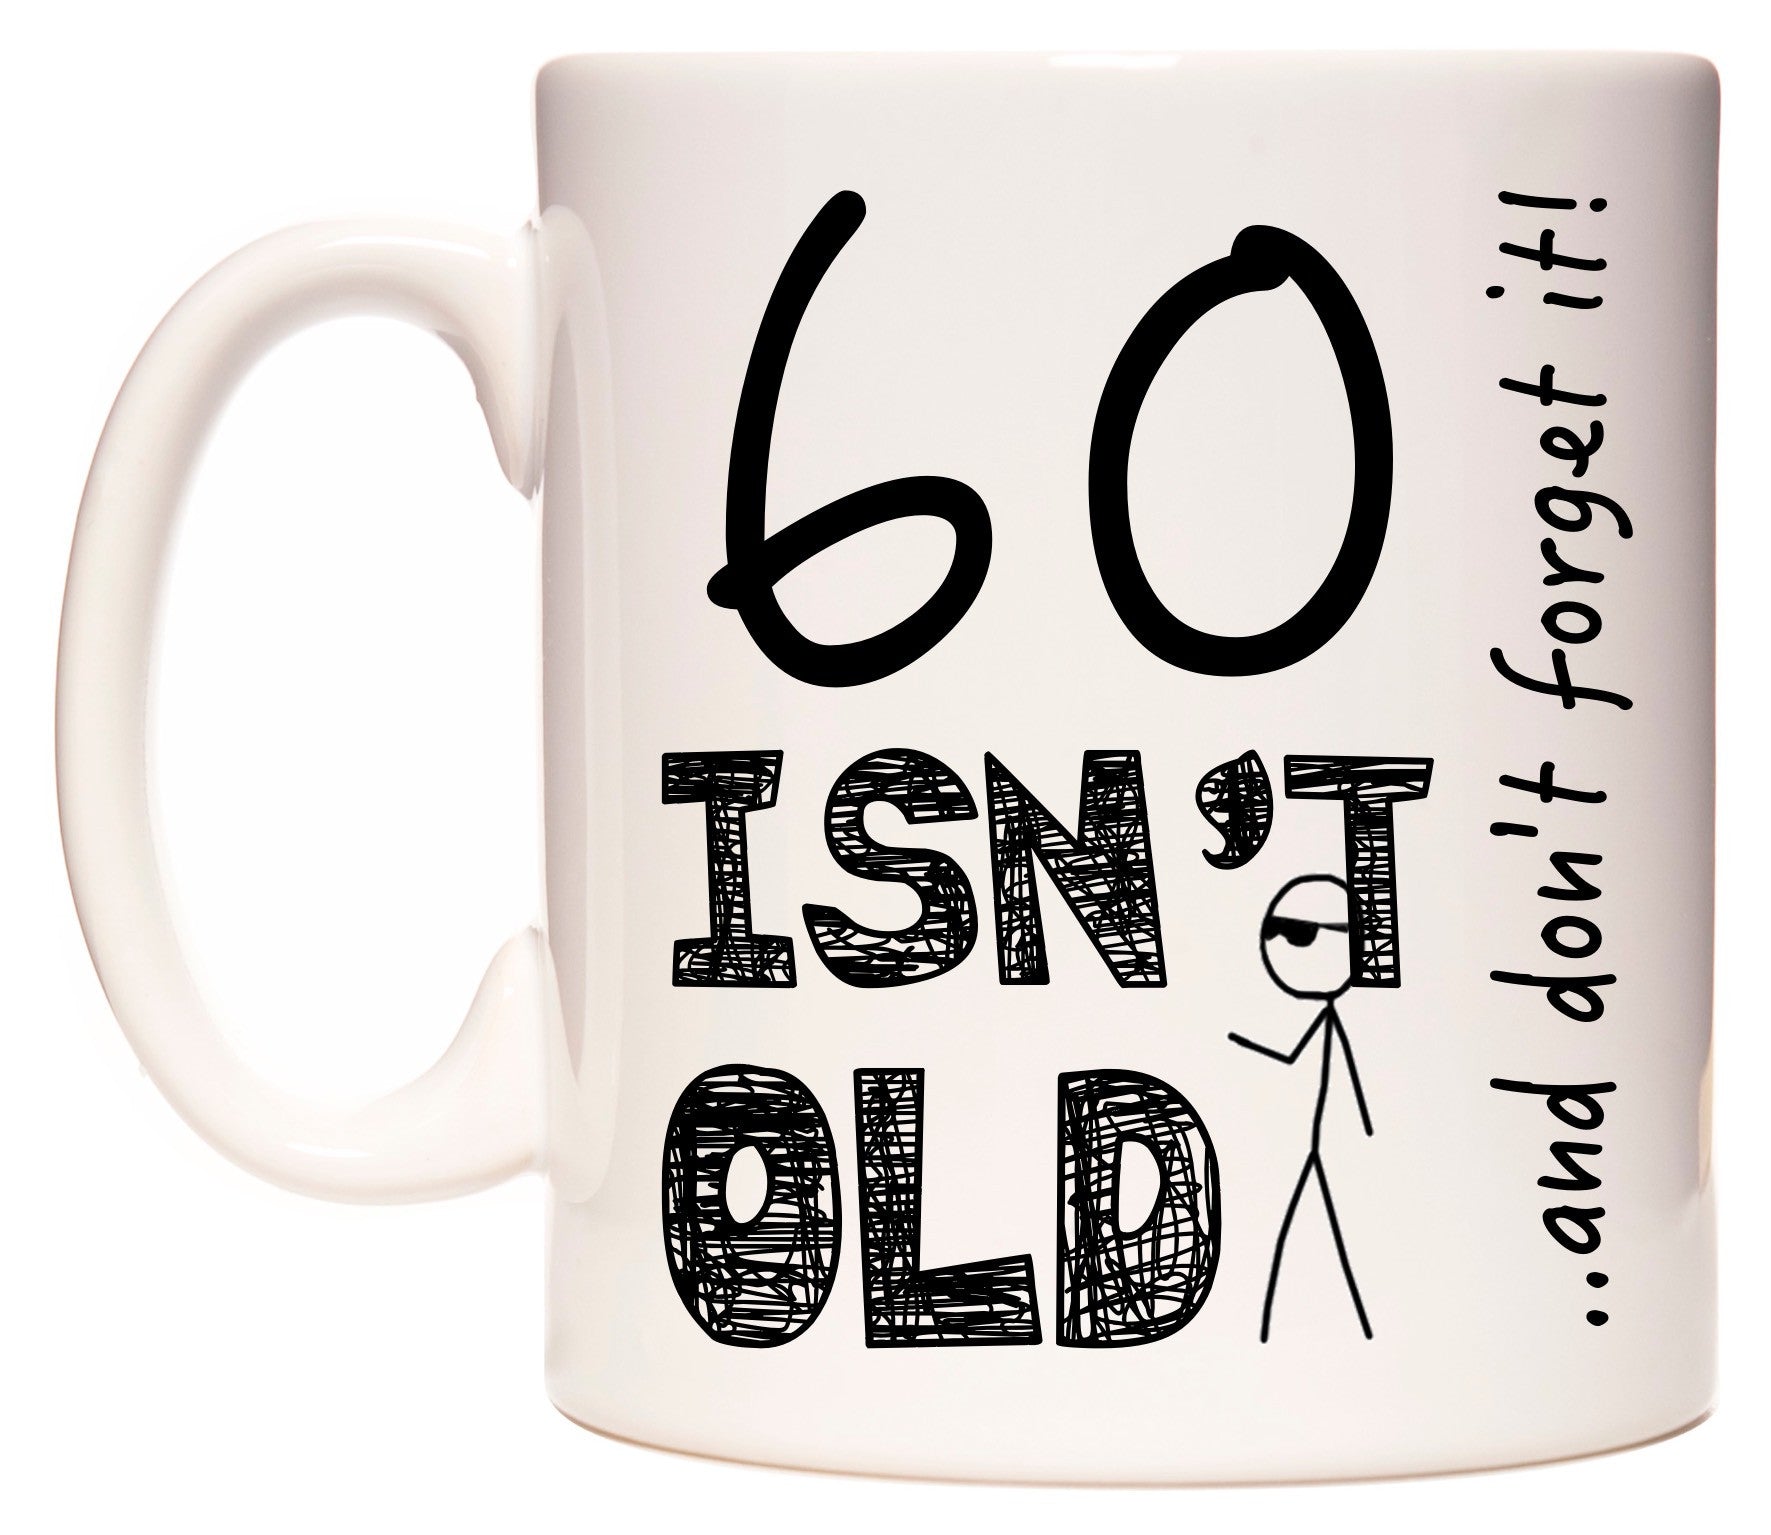 This mug features 60 Isn't Old